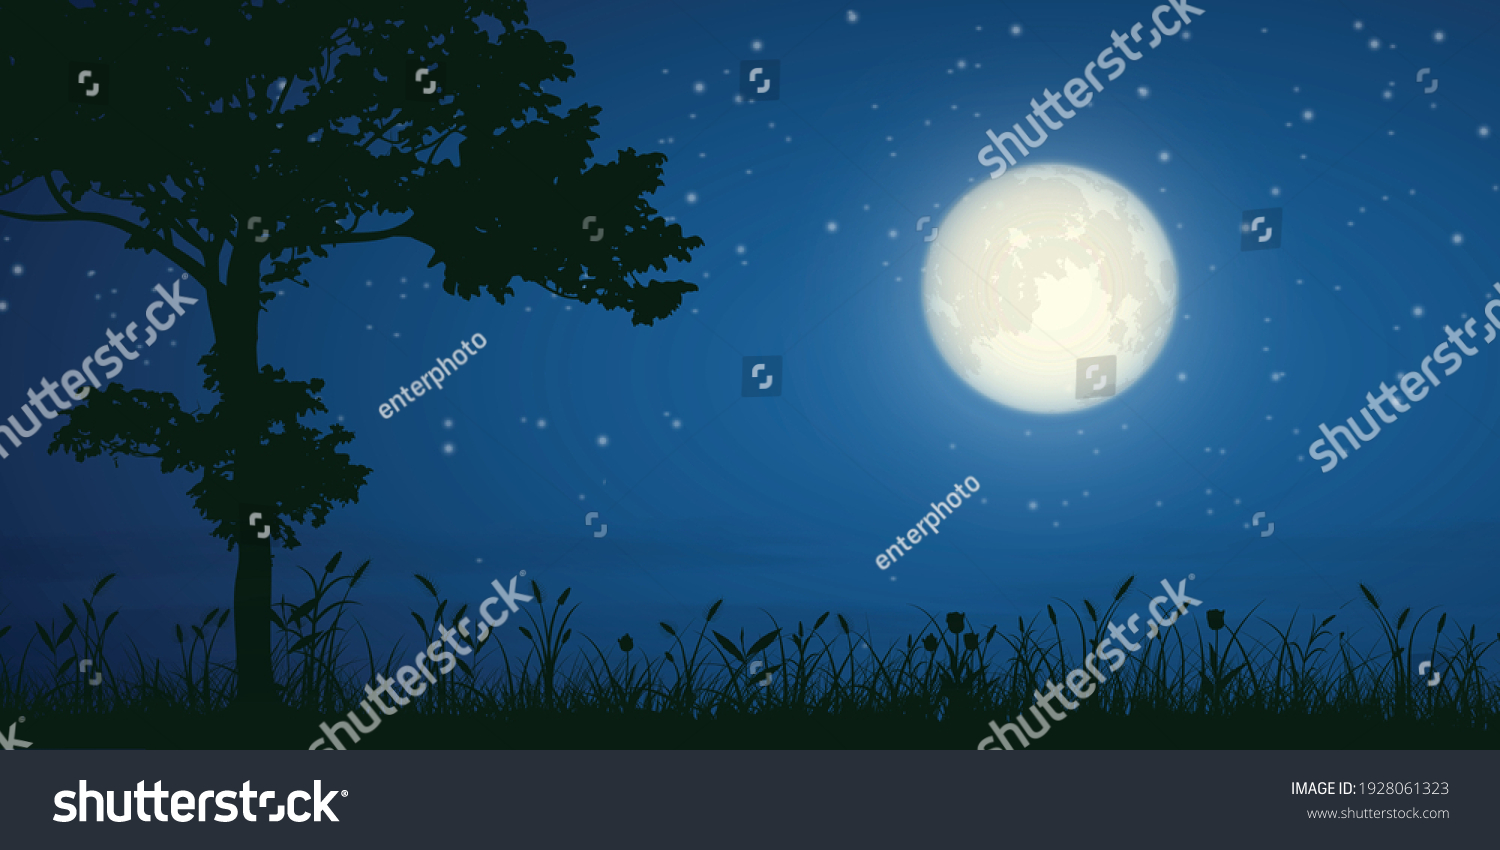 starry night and full moon with tree silhouette,  landscape background, vector illustration #1928061323